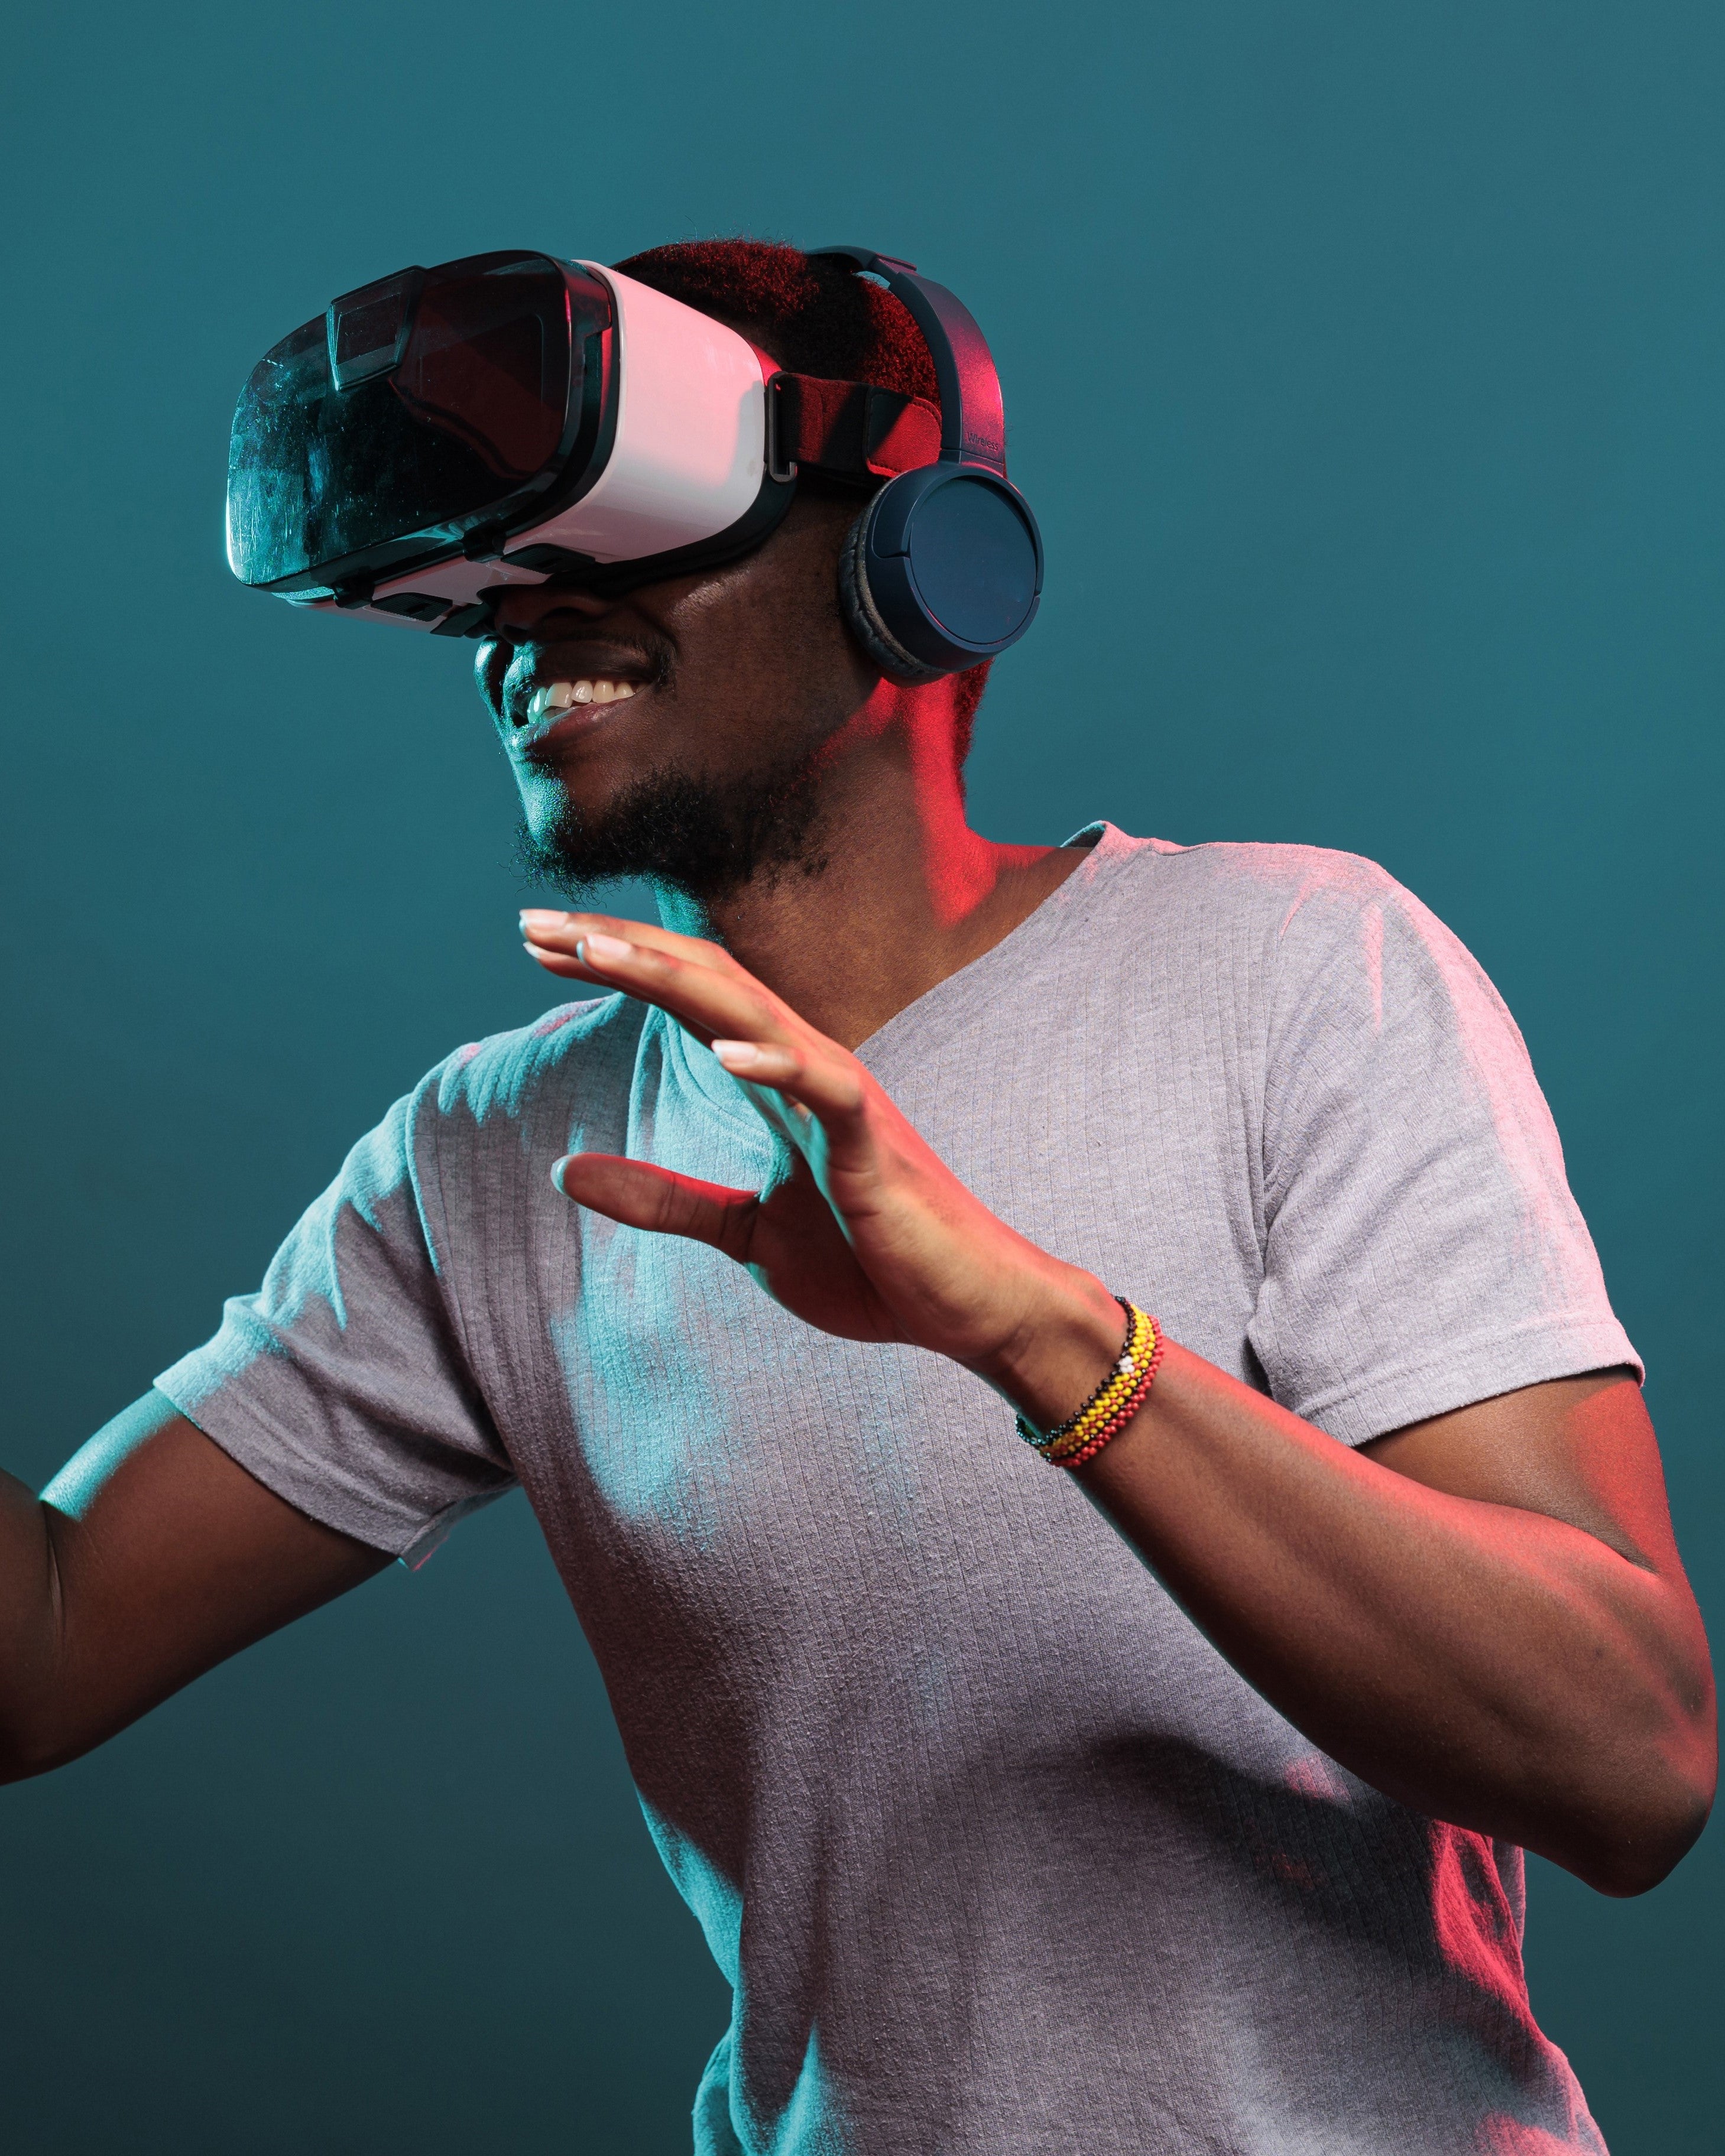 smiling-model-playing-virtual-game-interactive-vr-goggles-having-fun-with-modern-3d-technology-person-using-futuristic-device-with-visual-simulation-tech-innovation-leisure-activity_V.jpg